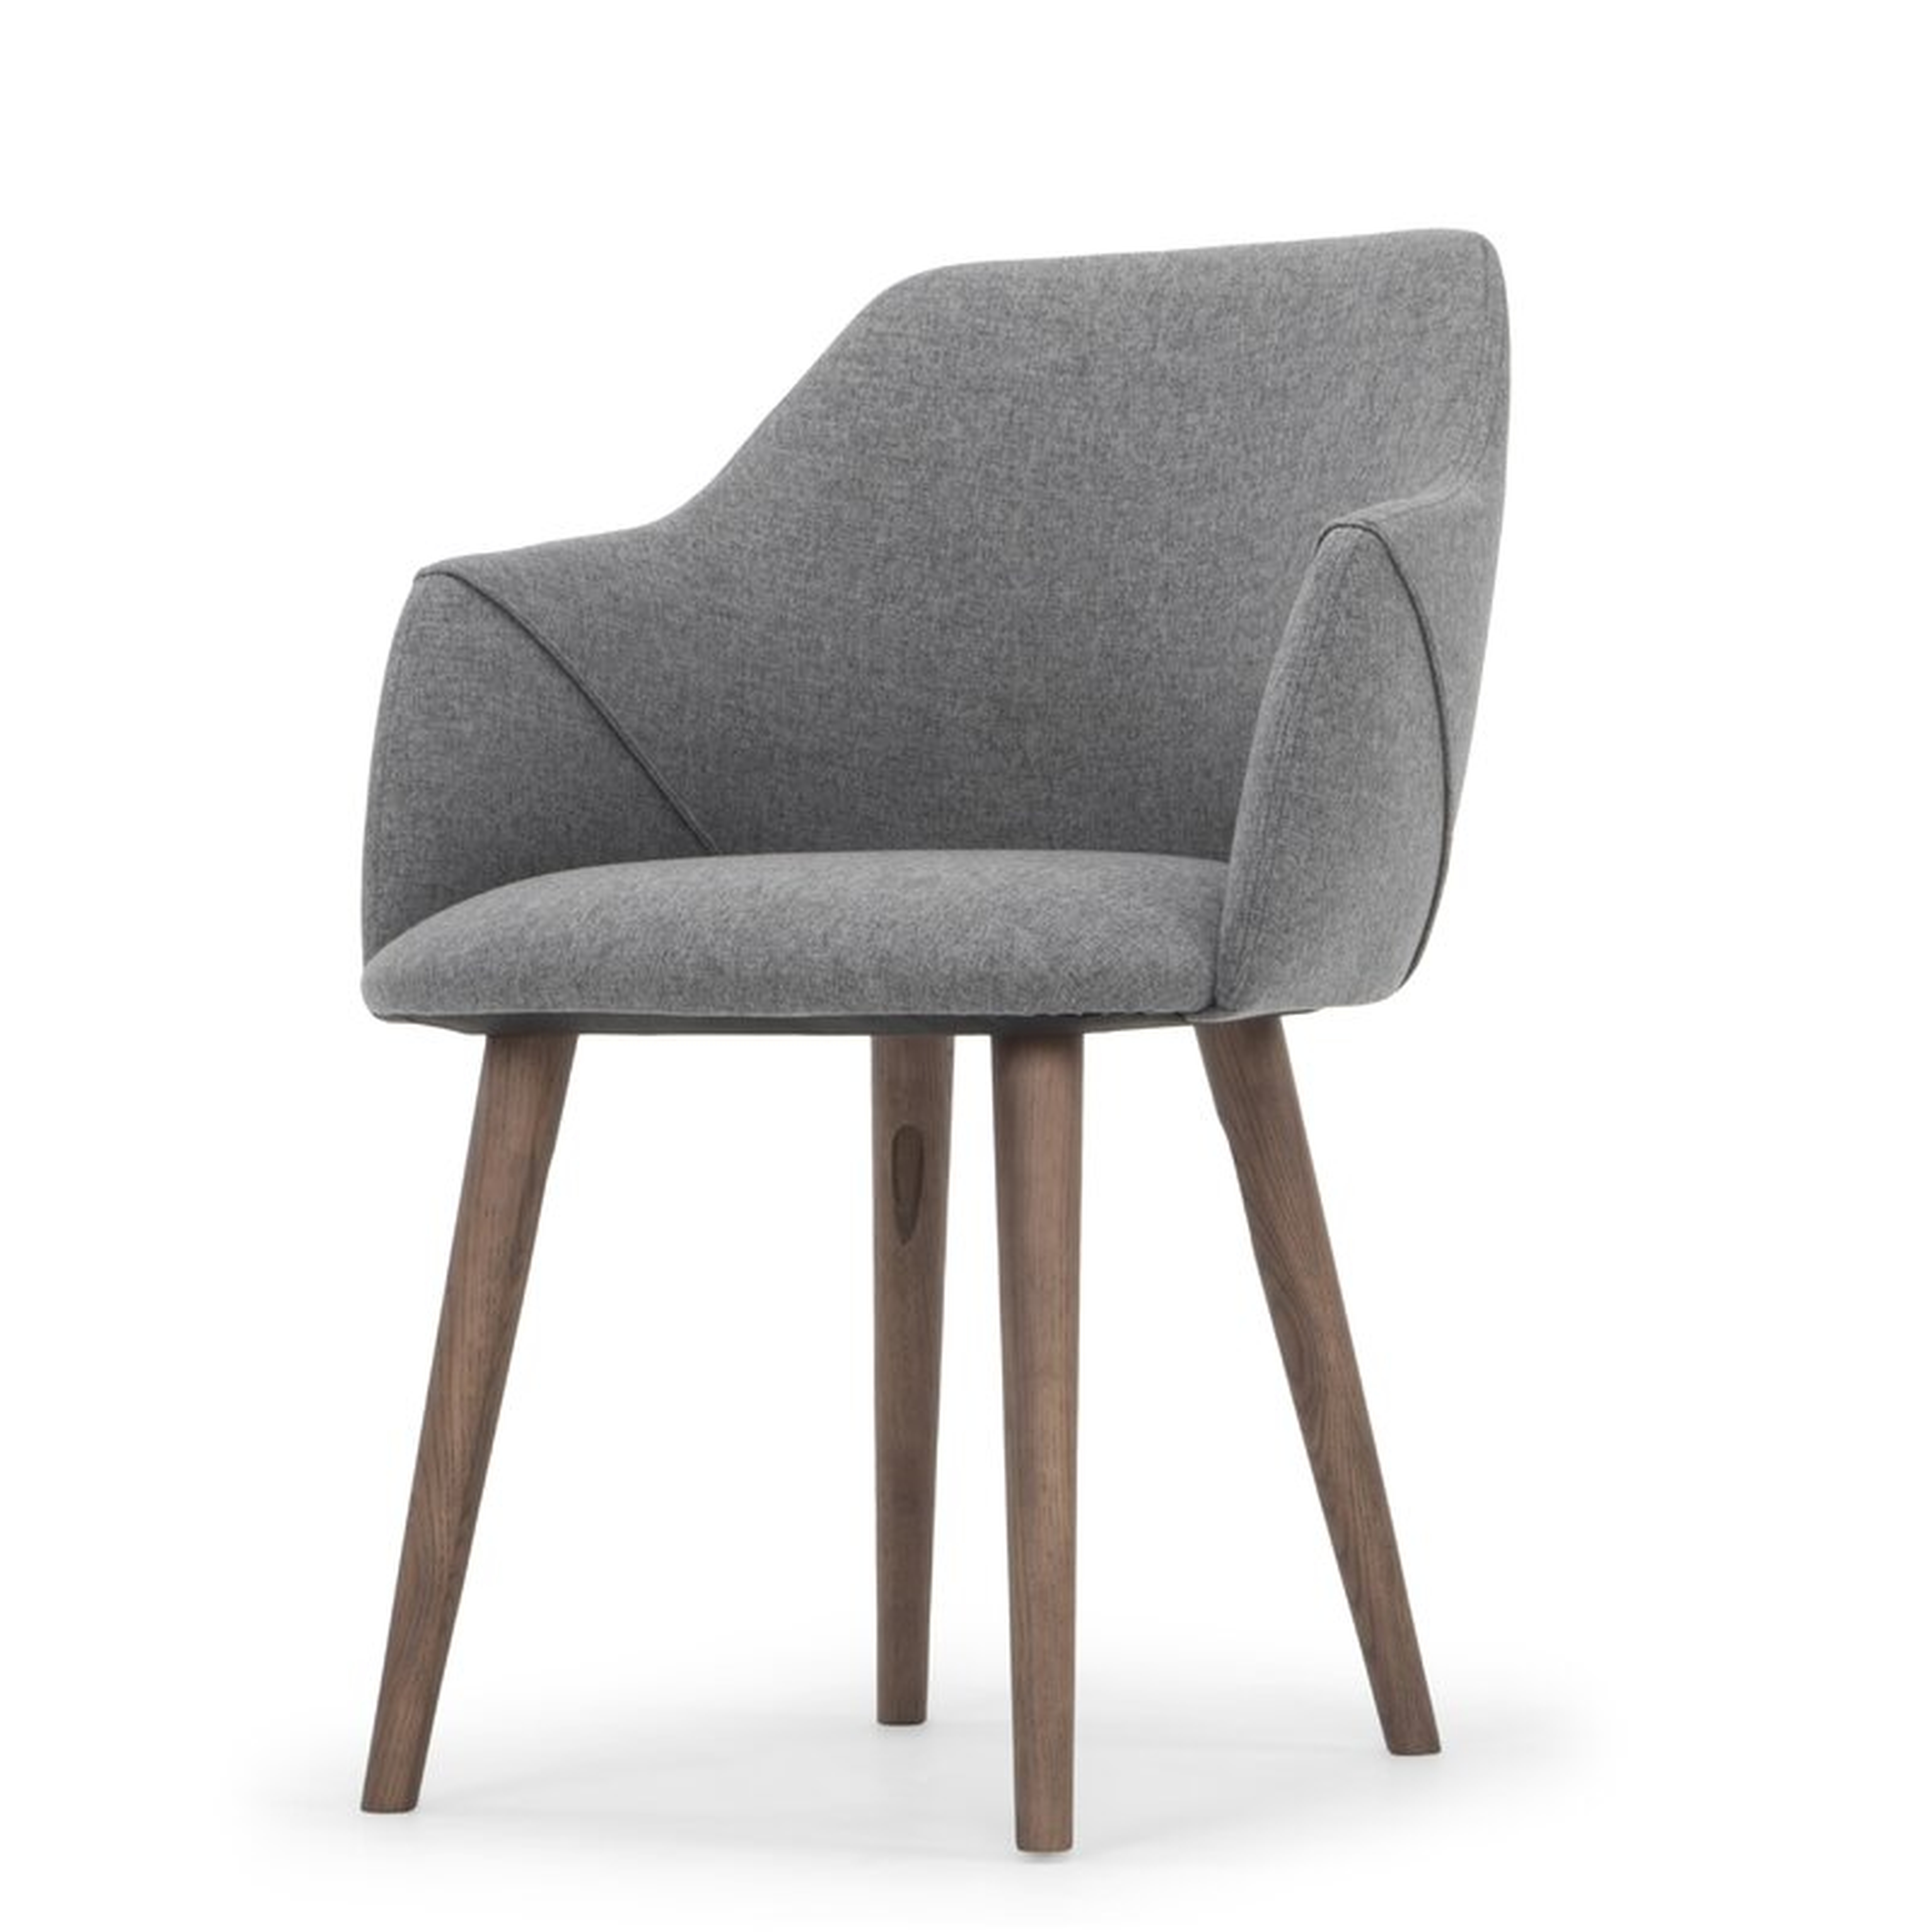 Brie Solid Wood Upholstered Dining Chair - AllModern